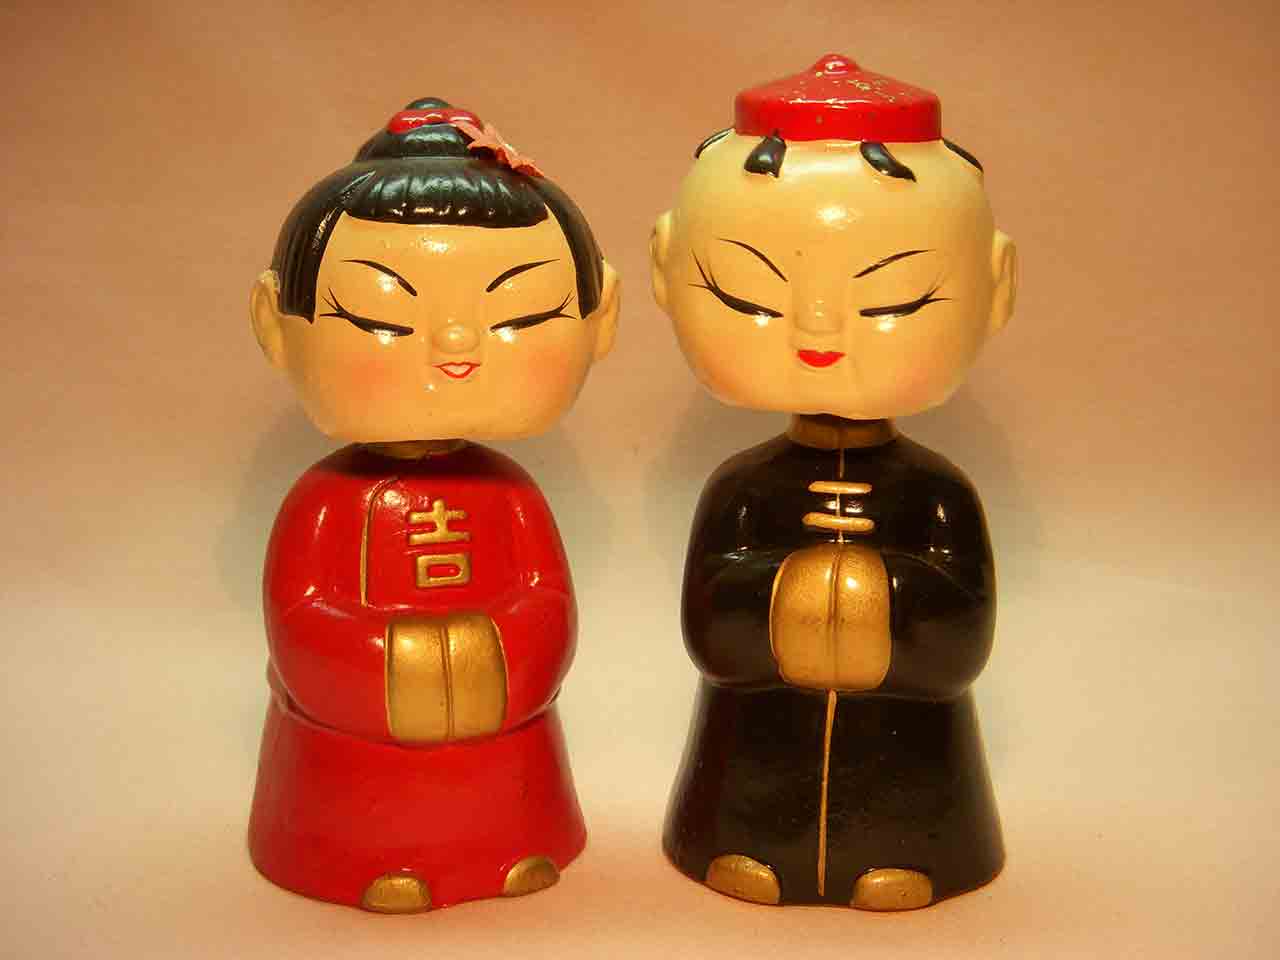 Asian couple with bobbing heads salt and pepper shaker